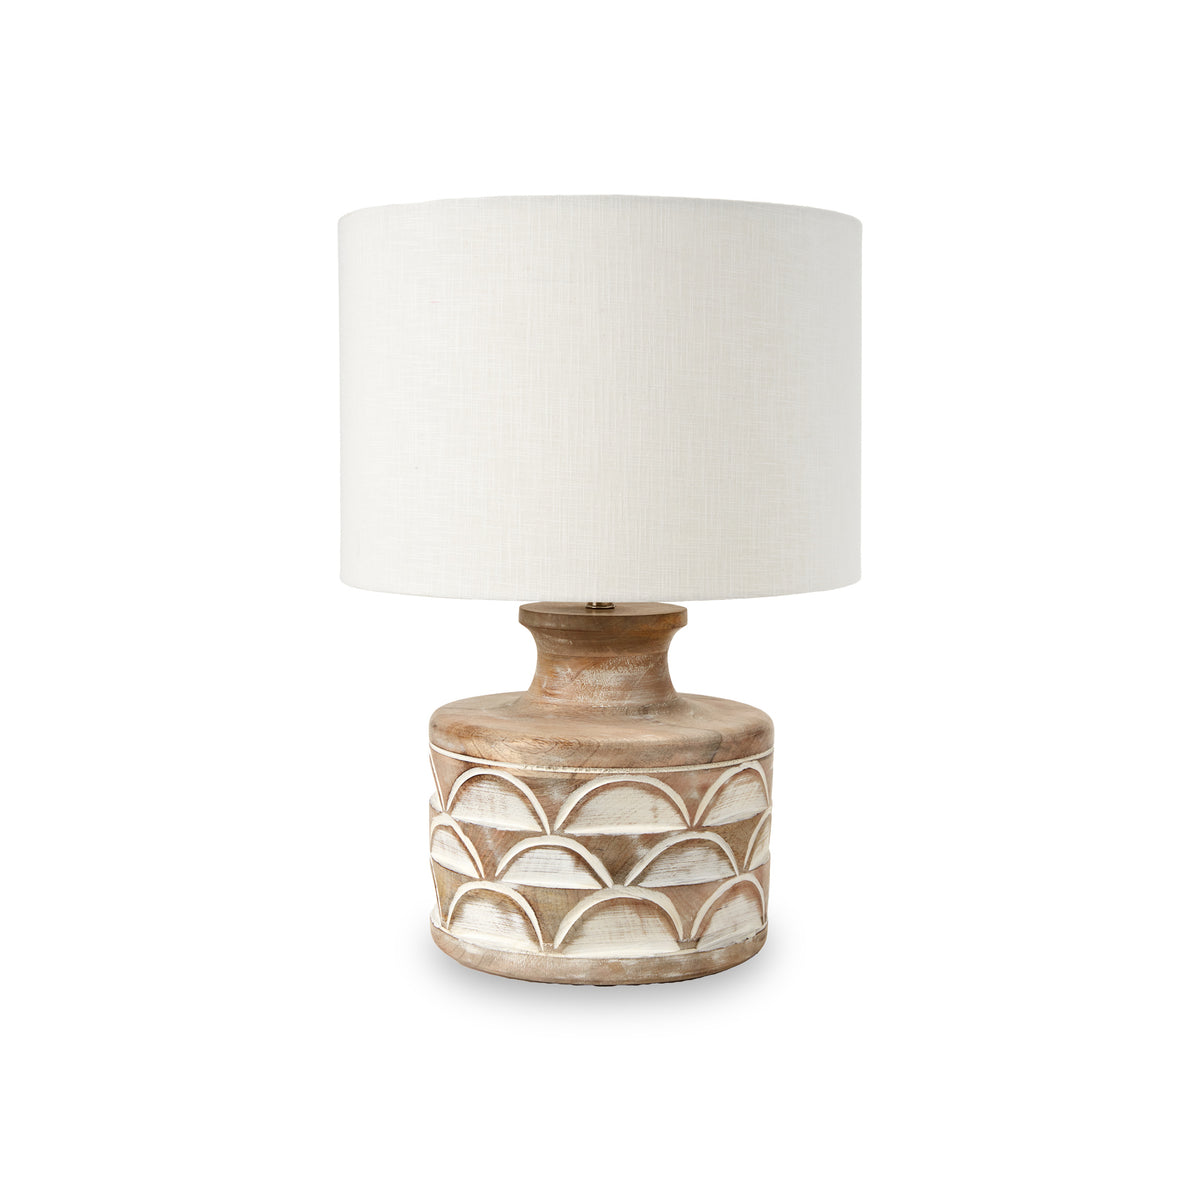 Kingsbury White Wash Large Carved Wood Table Lamp from Roseland Furniture